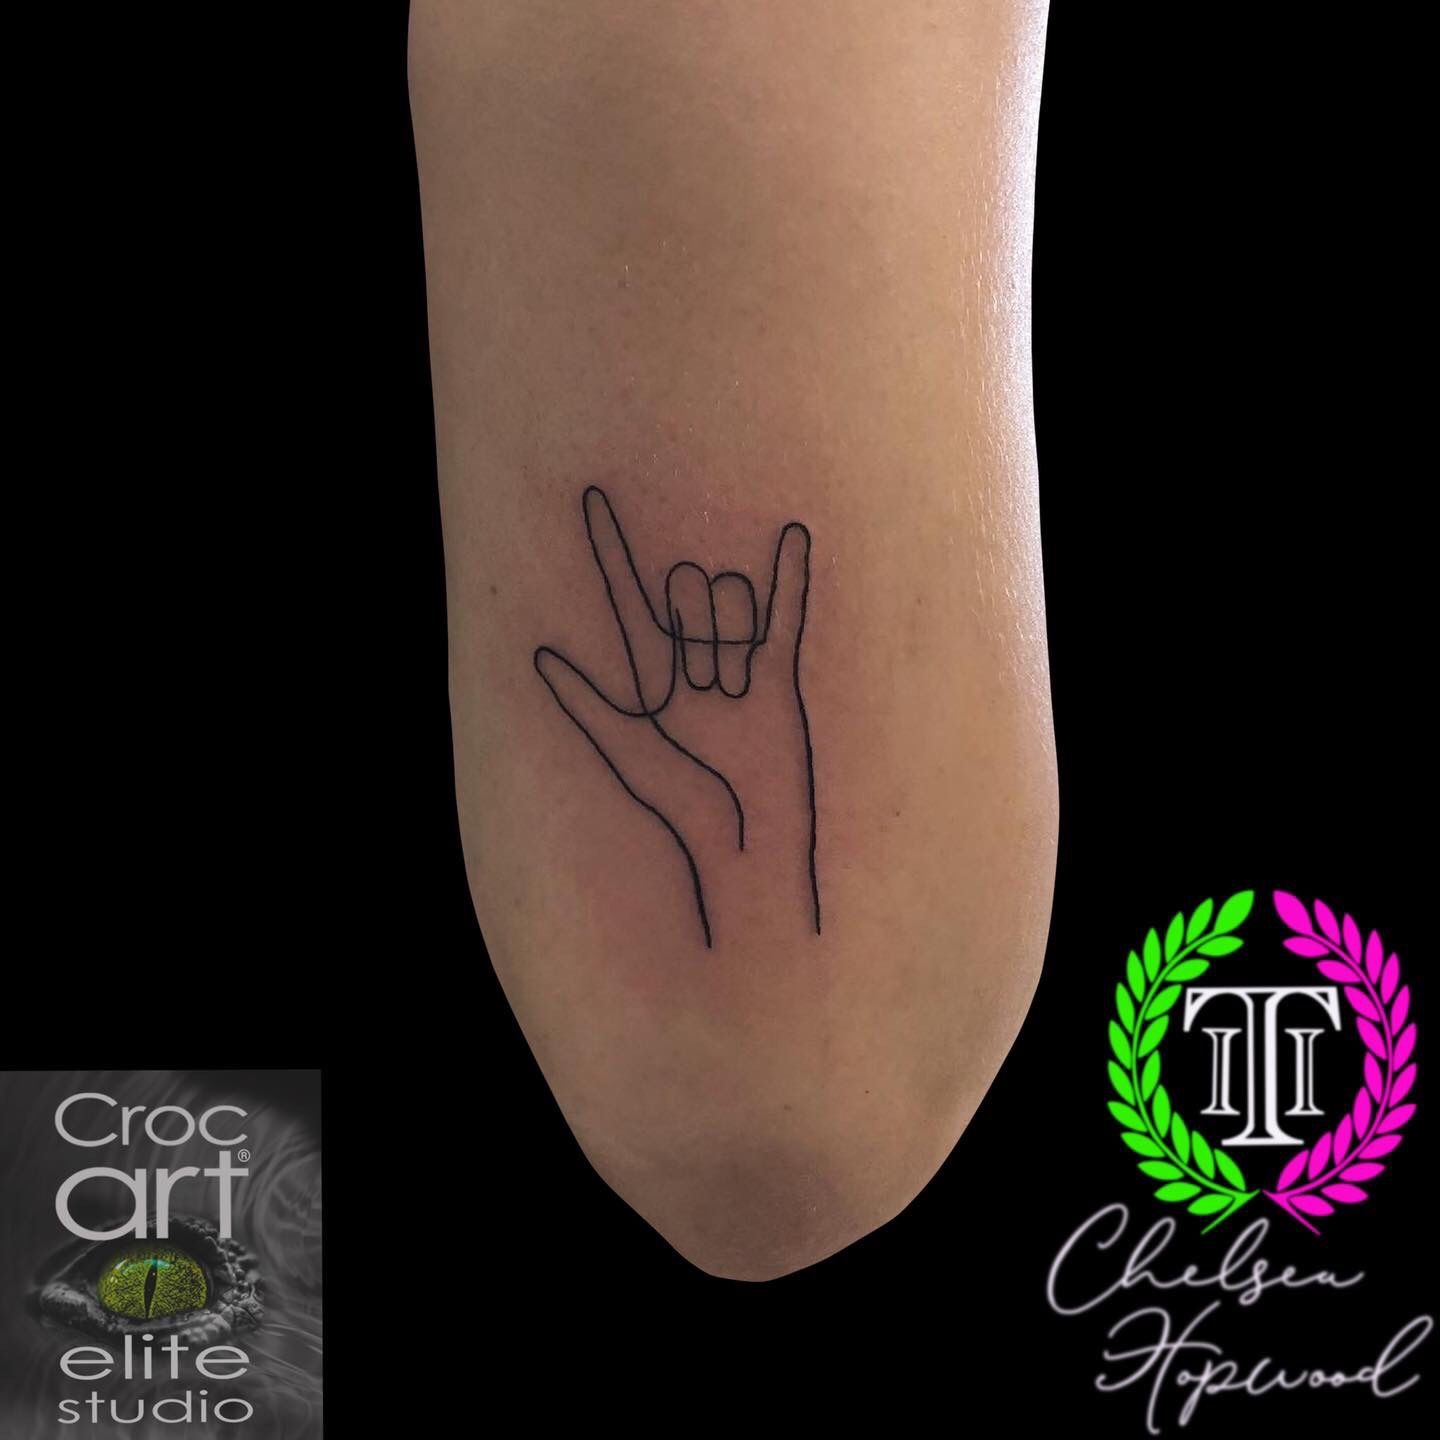  I Love You in sign language family ankle tattoos by Mike  instagramcomtattoohandsome The Dad is deafthe Mom and daughters got  matching   By Neck Deep Tattoo  Facebook